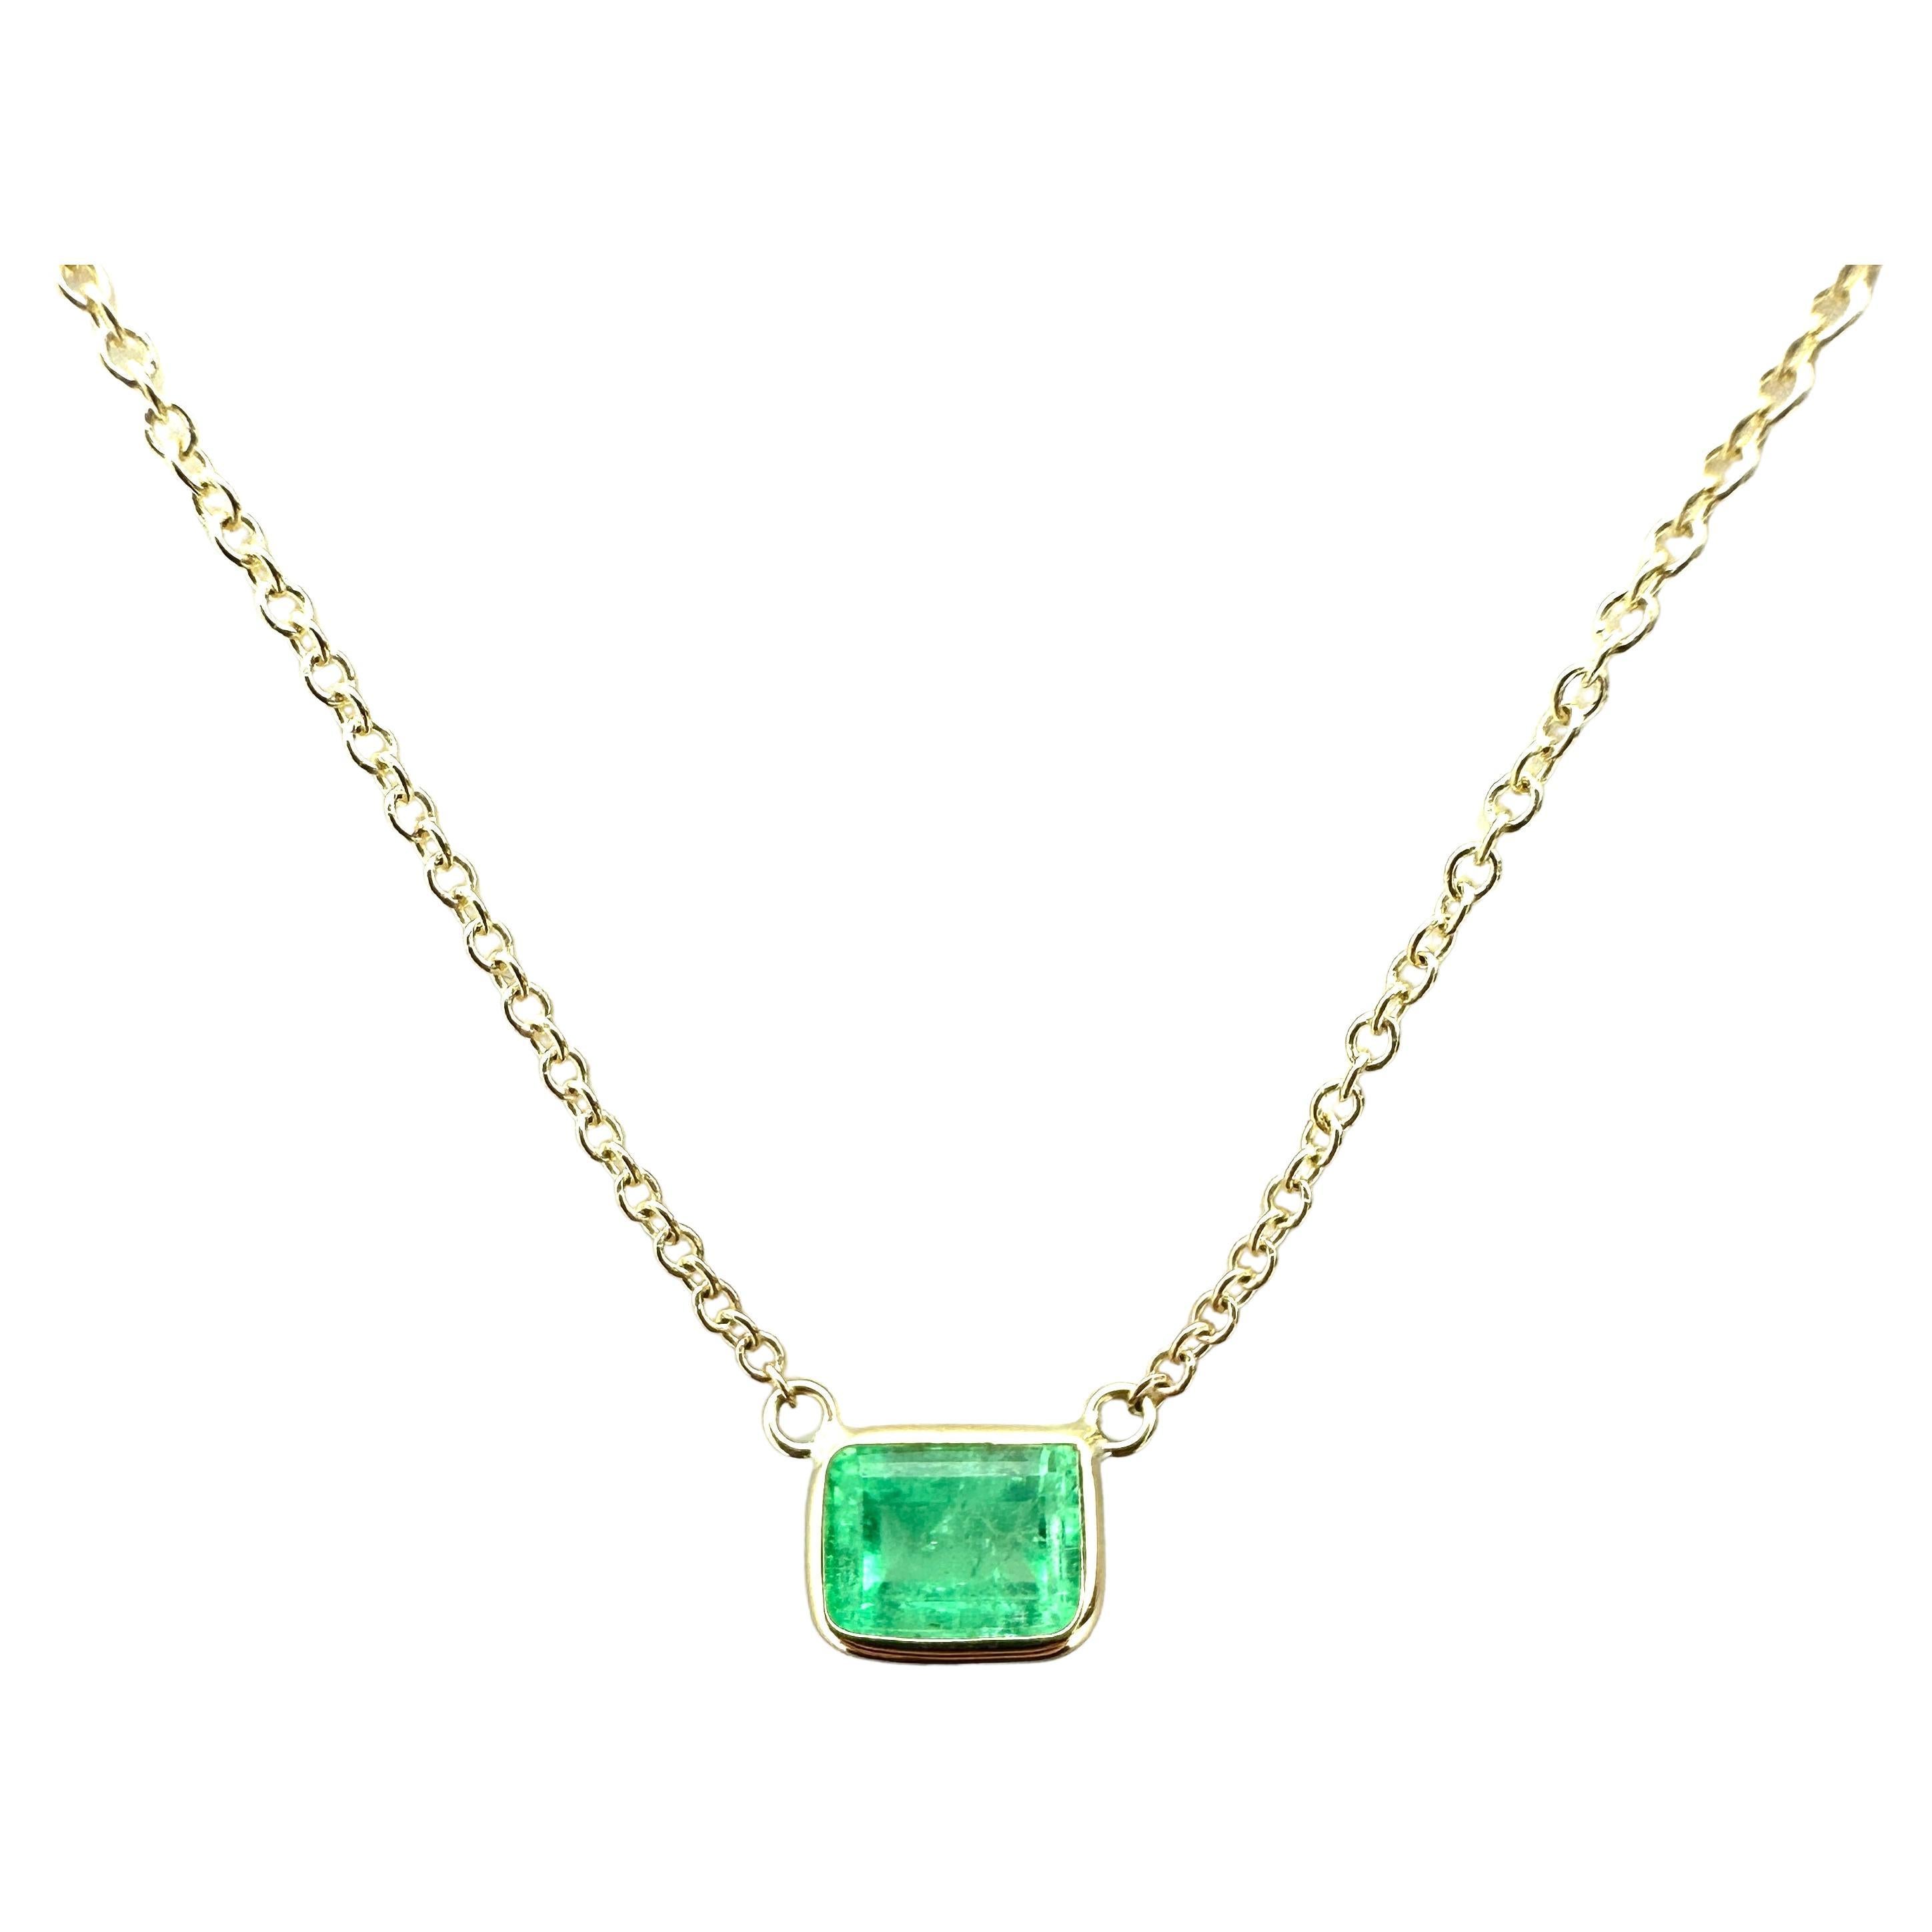 1.09 Carat Weight Green Emerald Emerald Cut Solitaire Necklace in 14k Yellow G